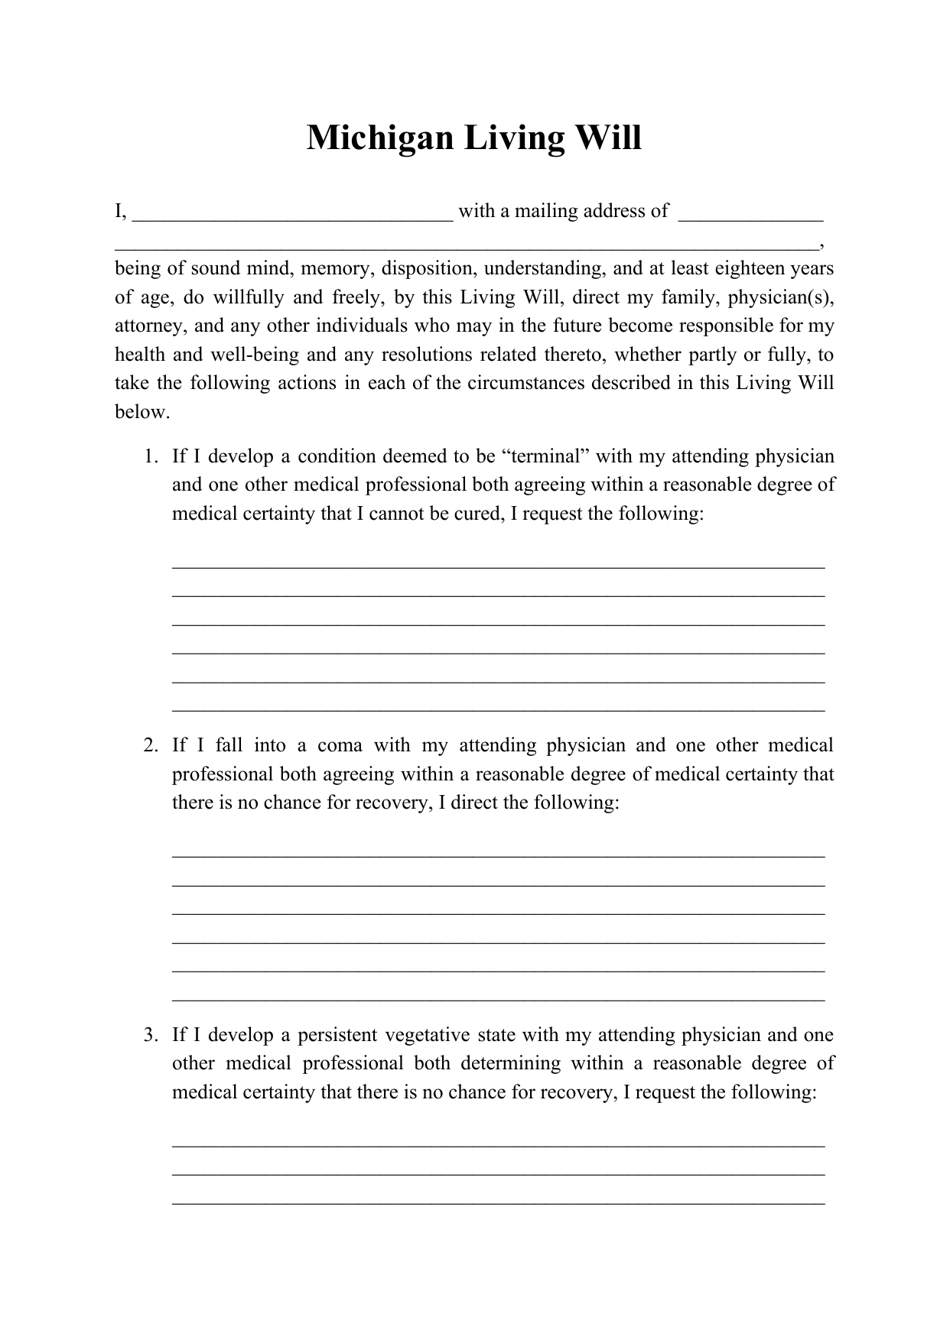 michigan-living-will-form-fill-out-sign-online-and-download-pdf